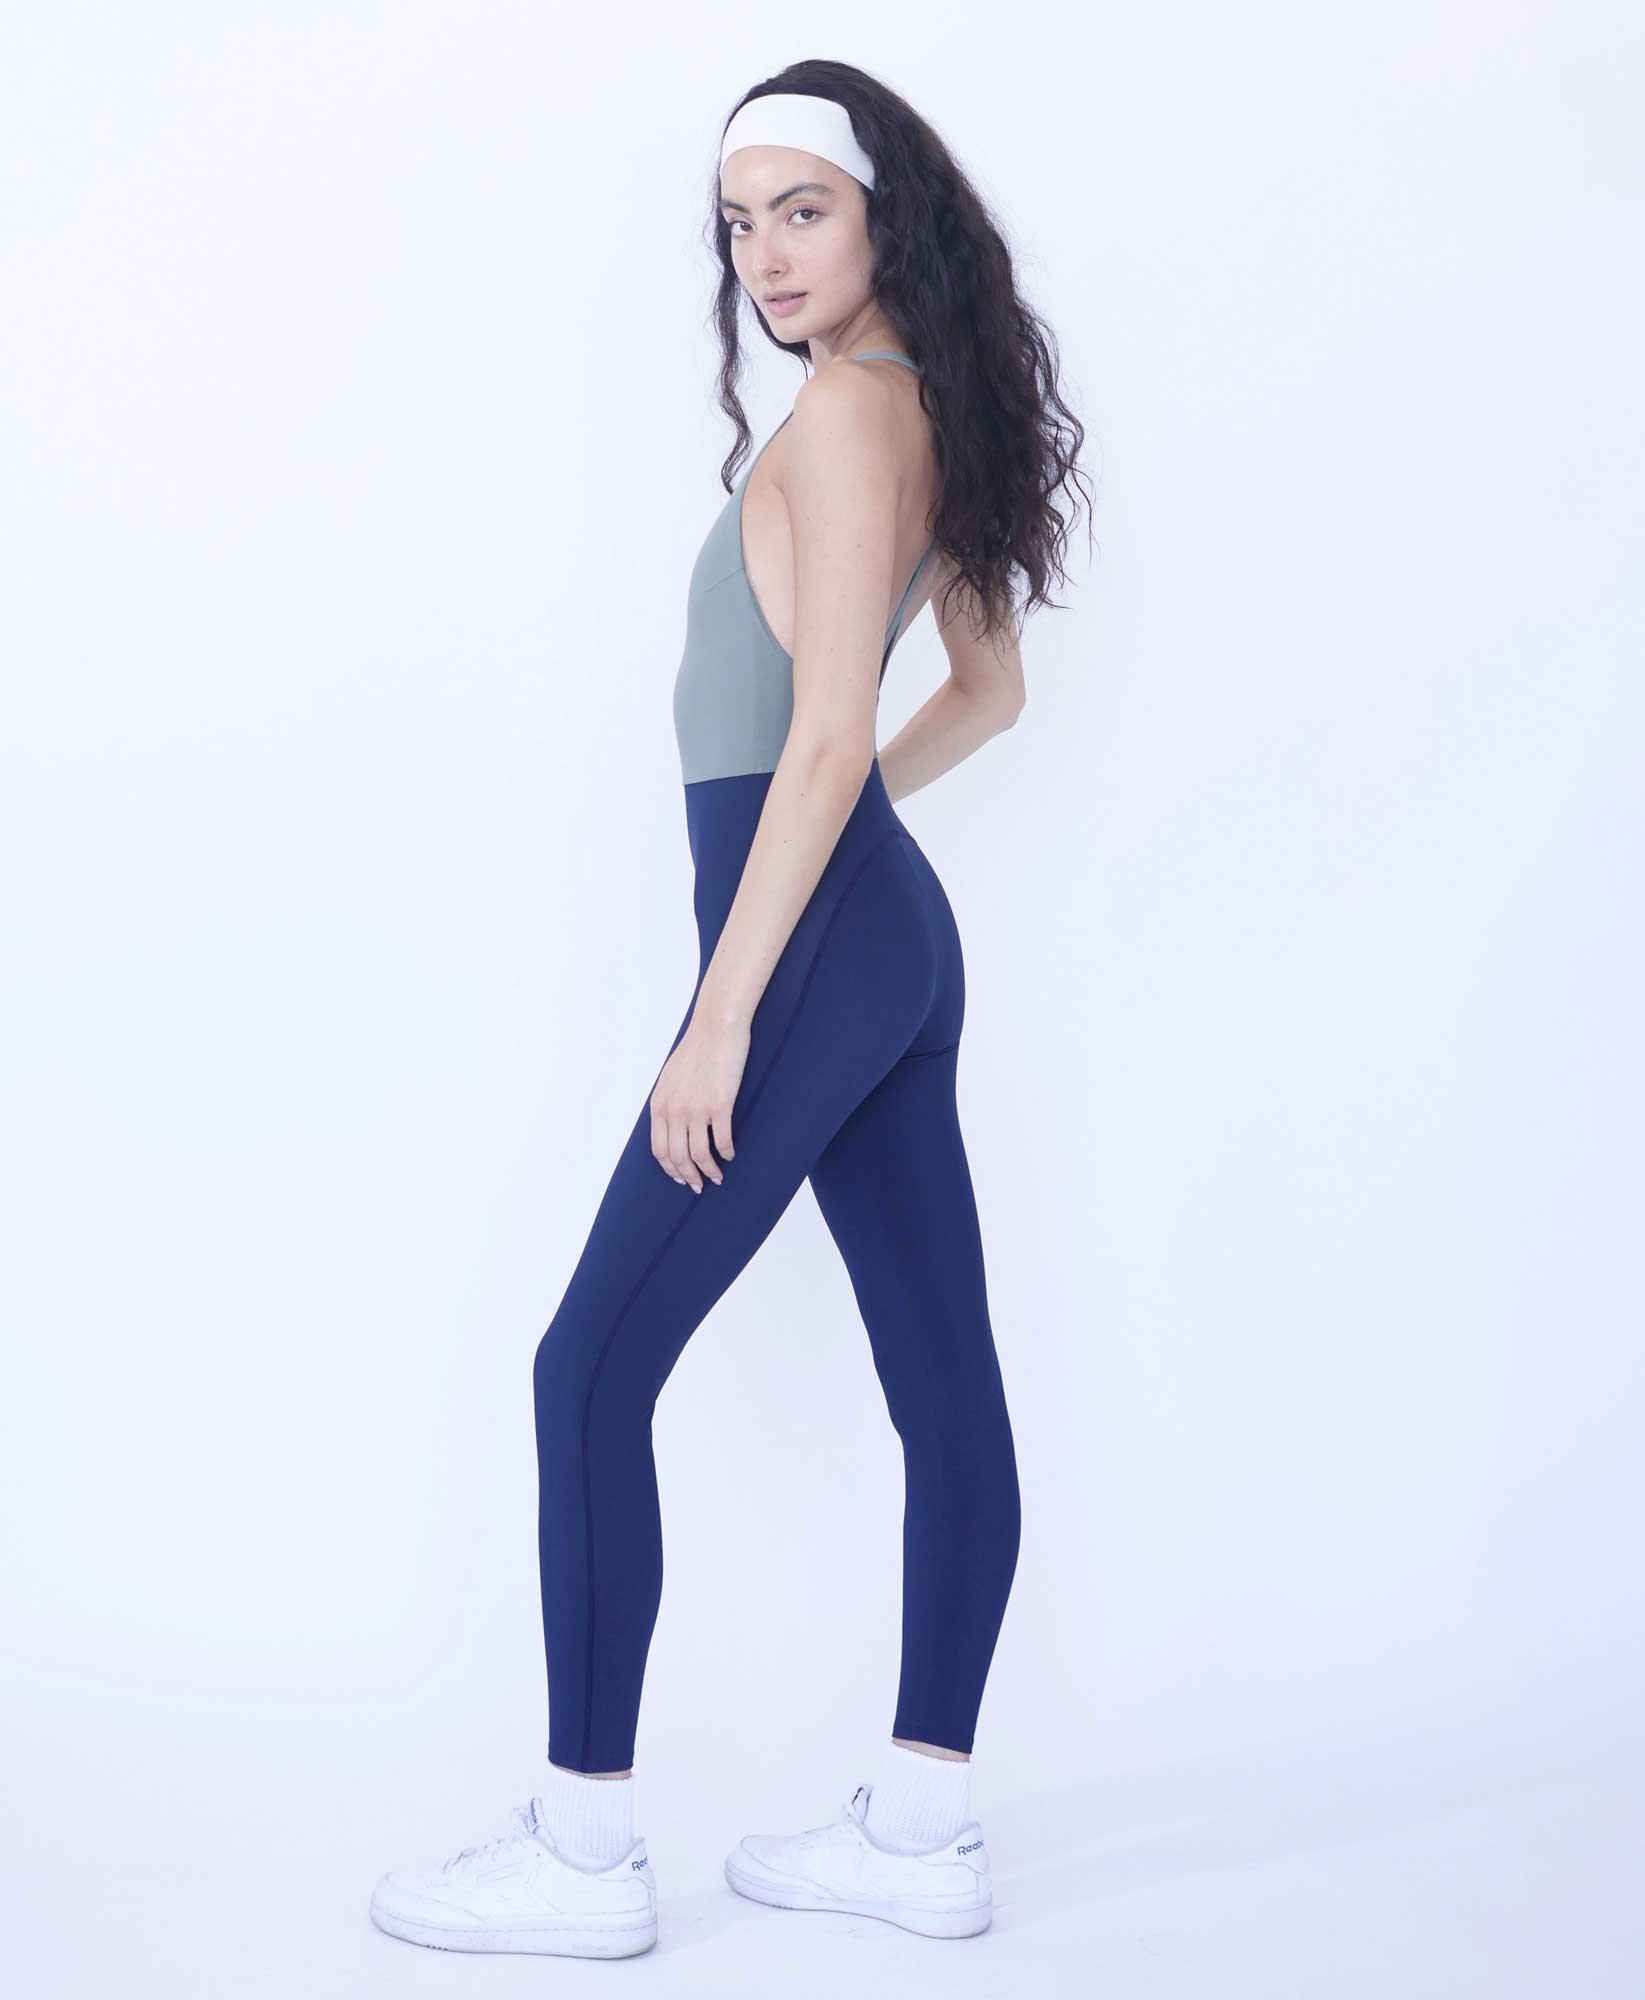 Wear One's At Liberty Unitard in Sage and Navy on Model Full Side View